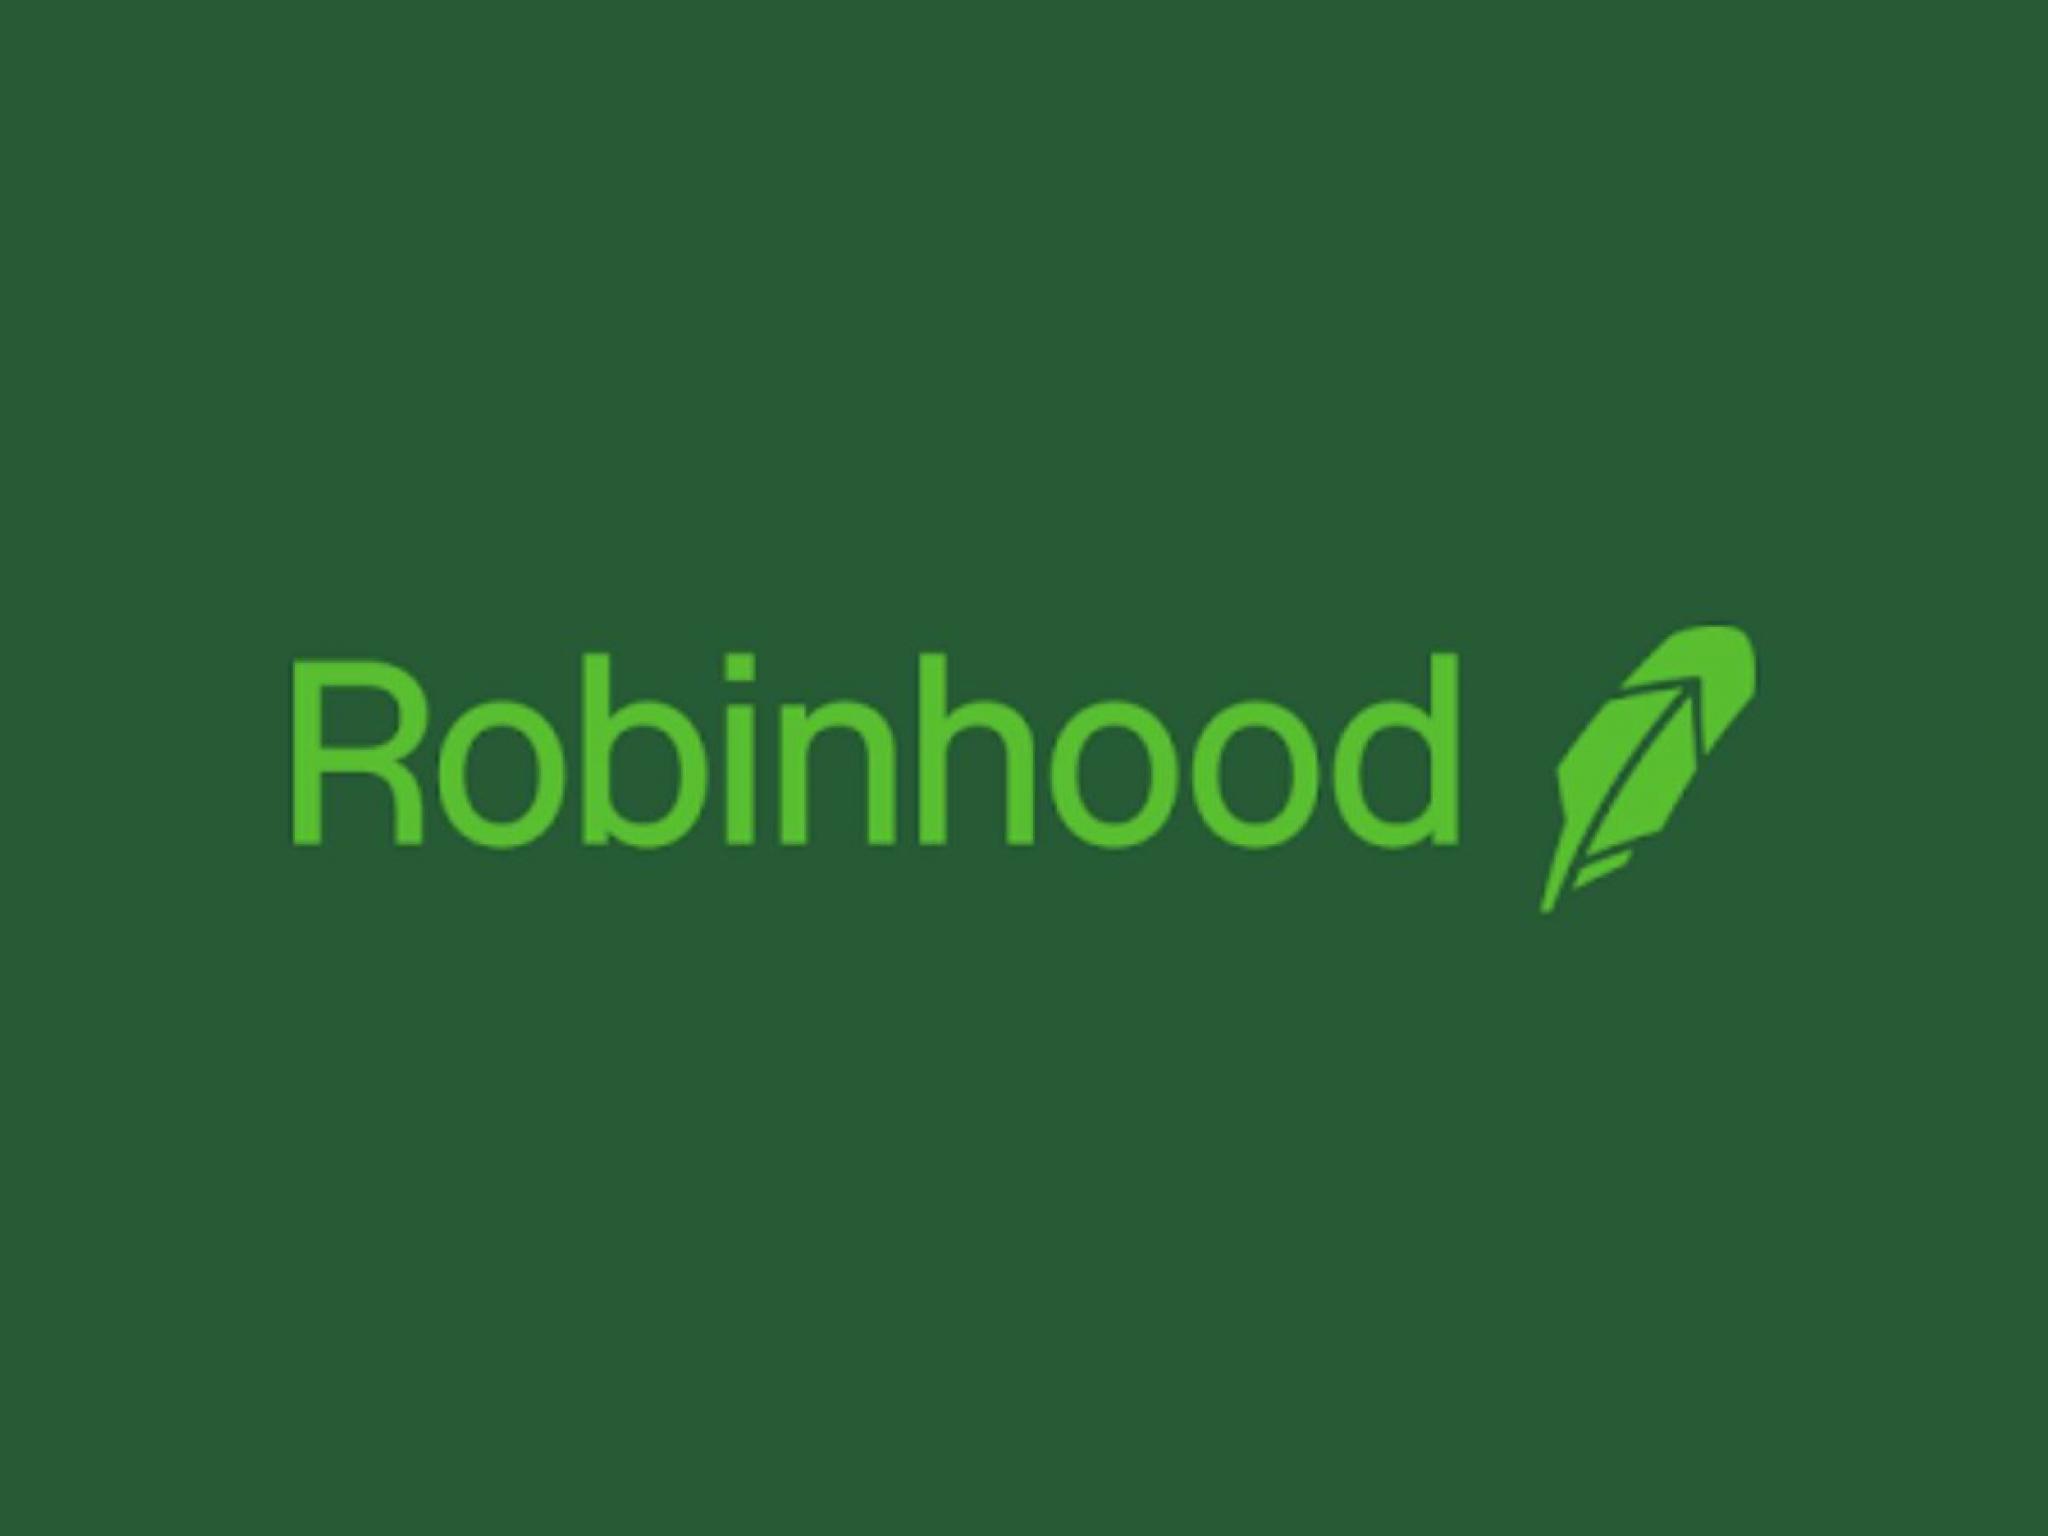  robinhood-ebay-upstart-and-other-big-stocks-moving-lower-in-wednesdays-pre-market-session 